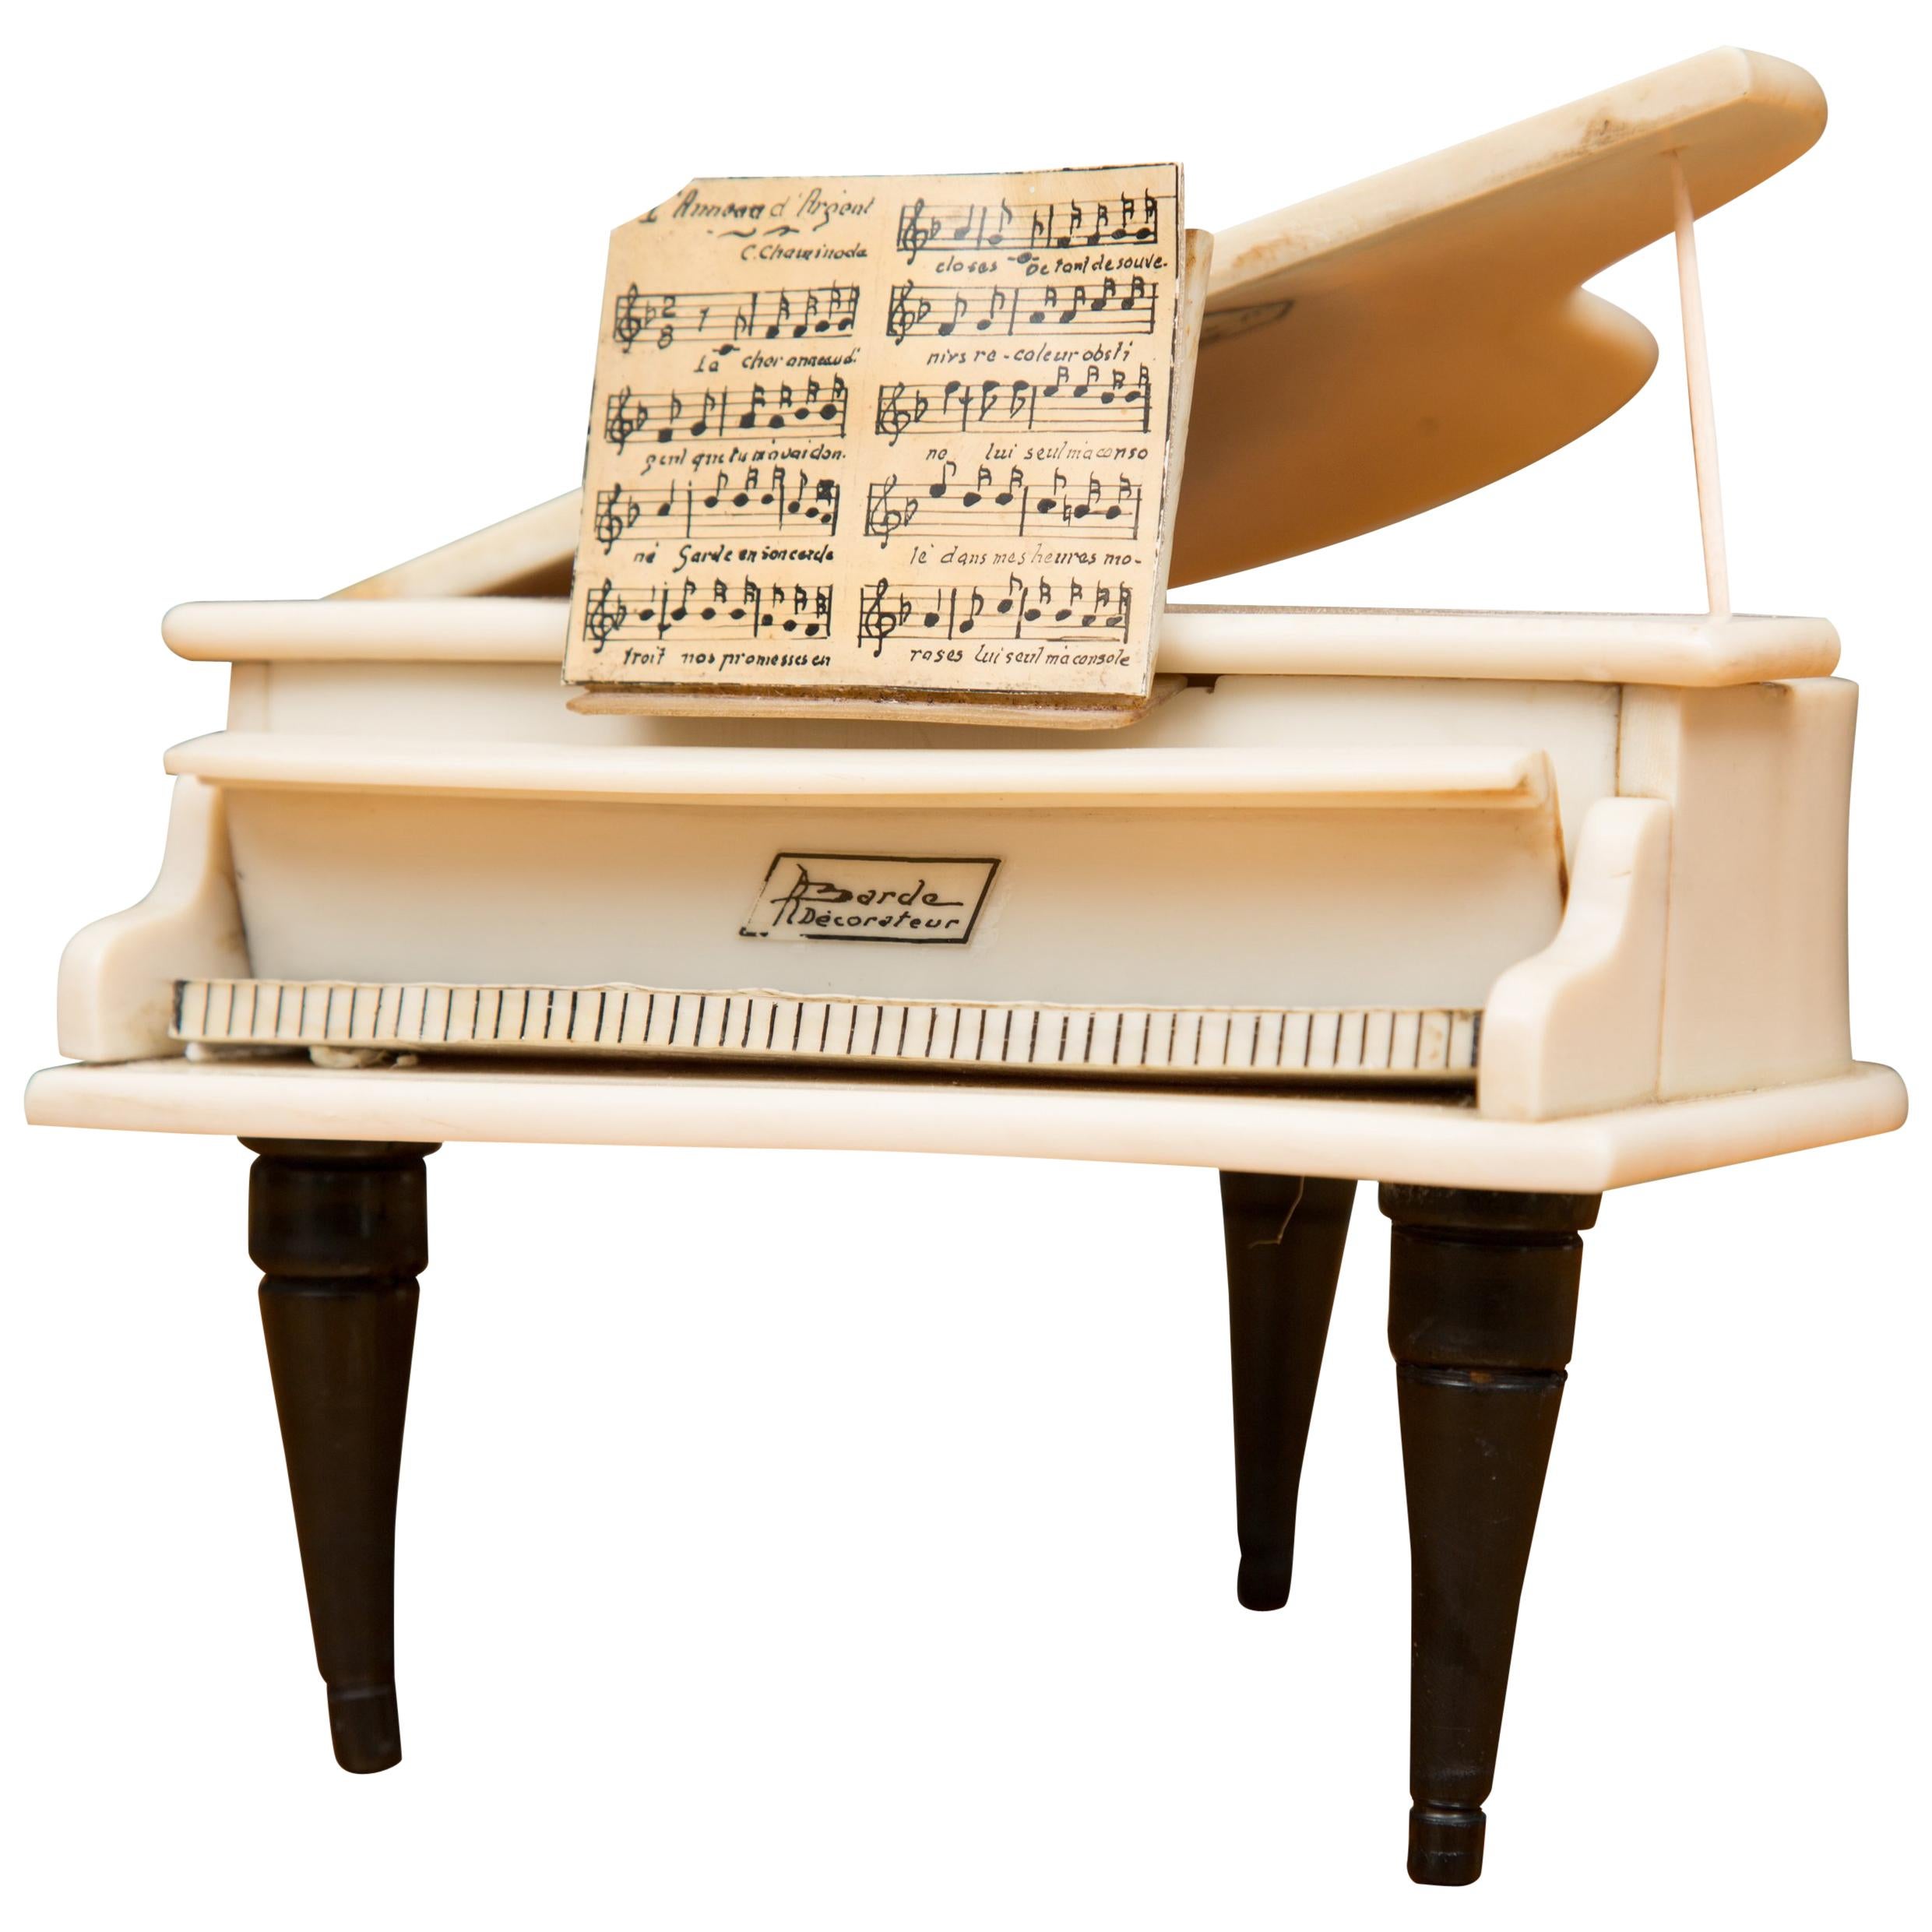 French Limited Edition Bakelite Minature Piano For Sale